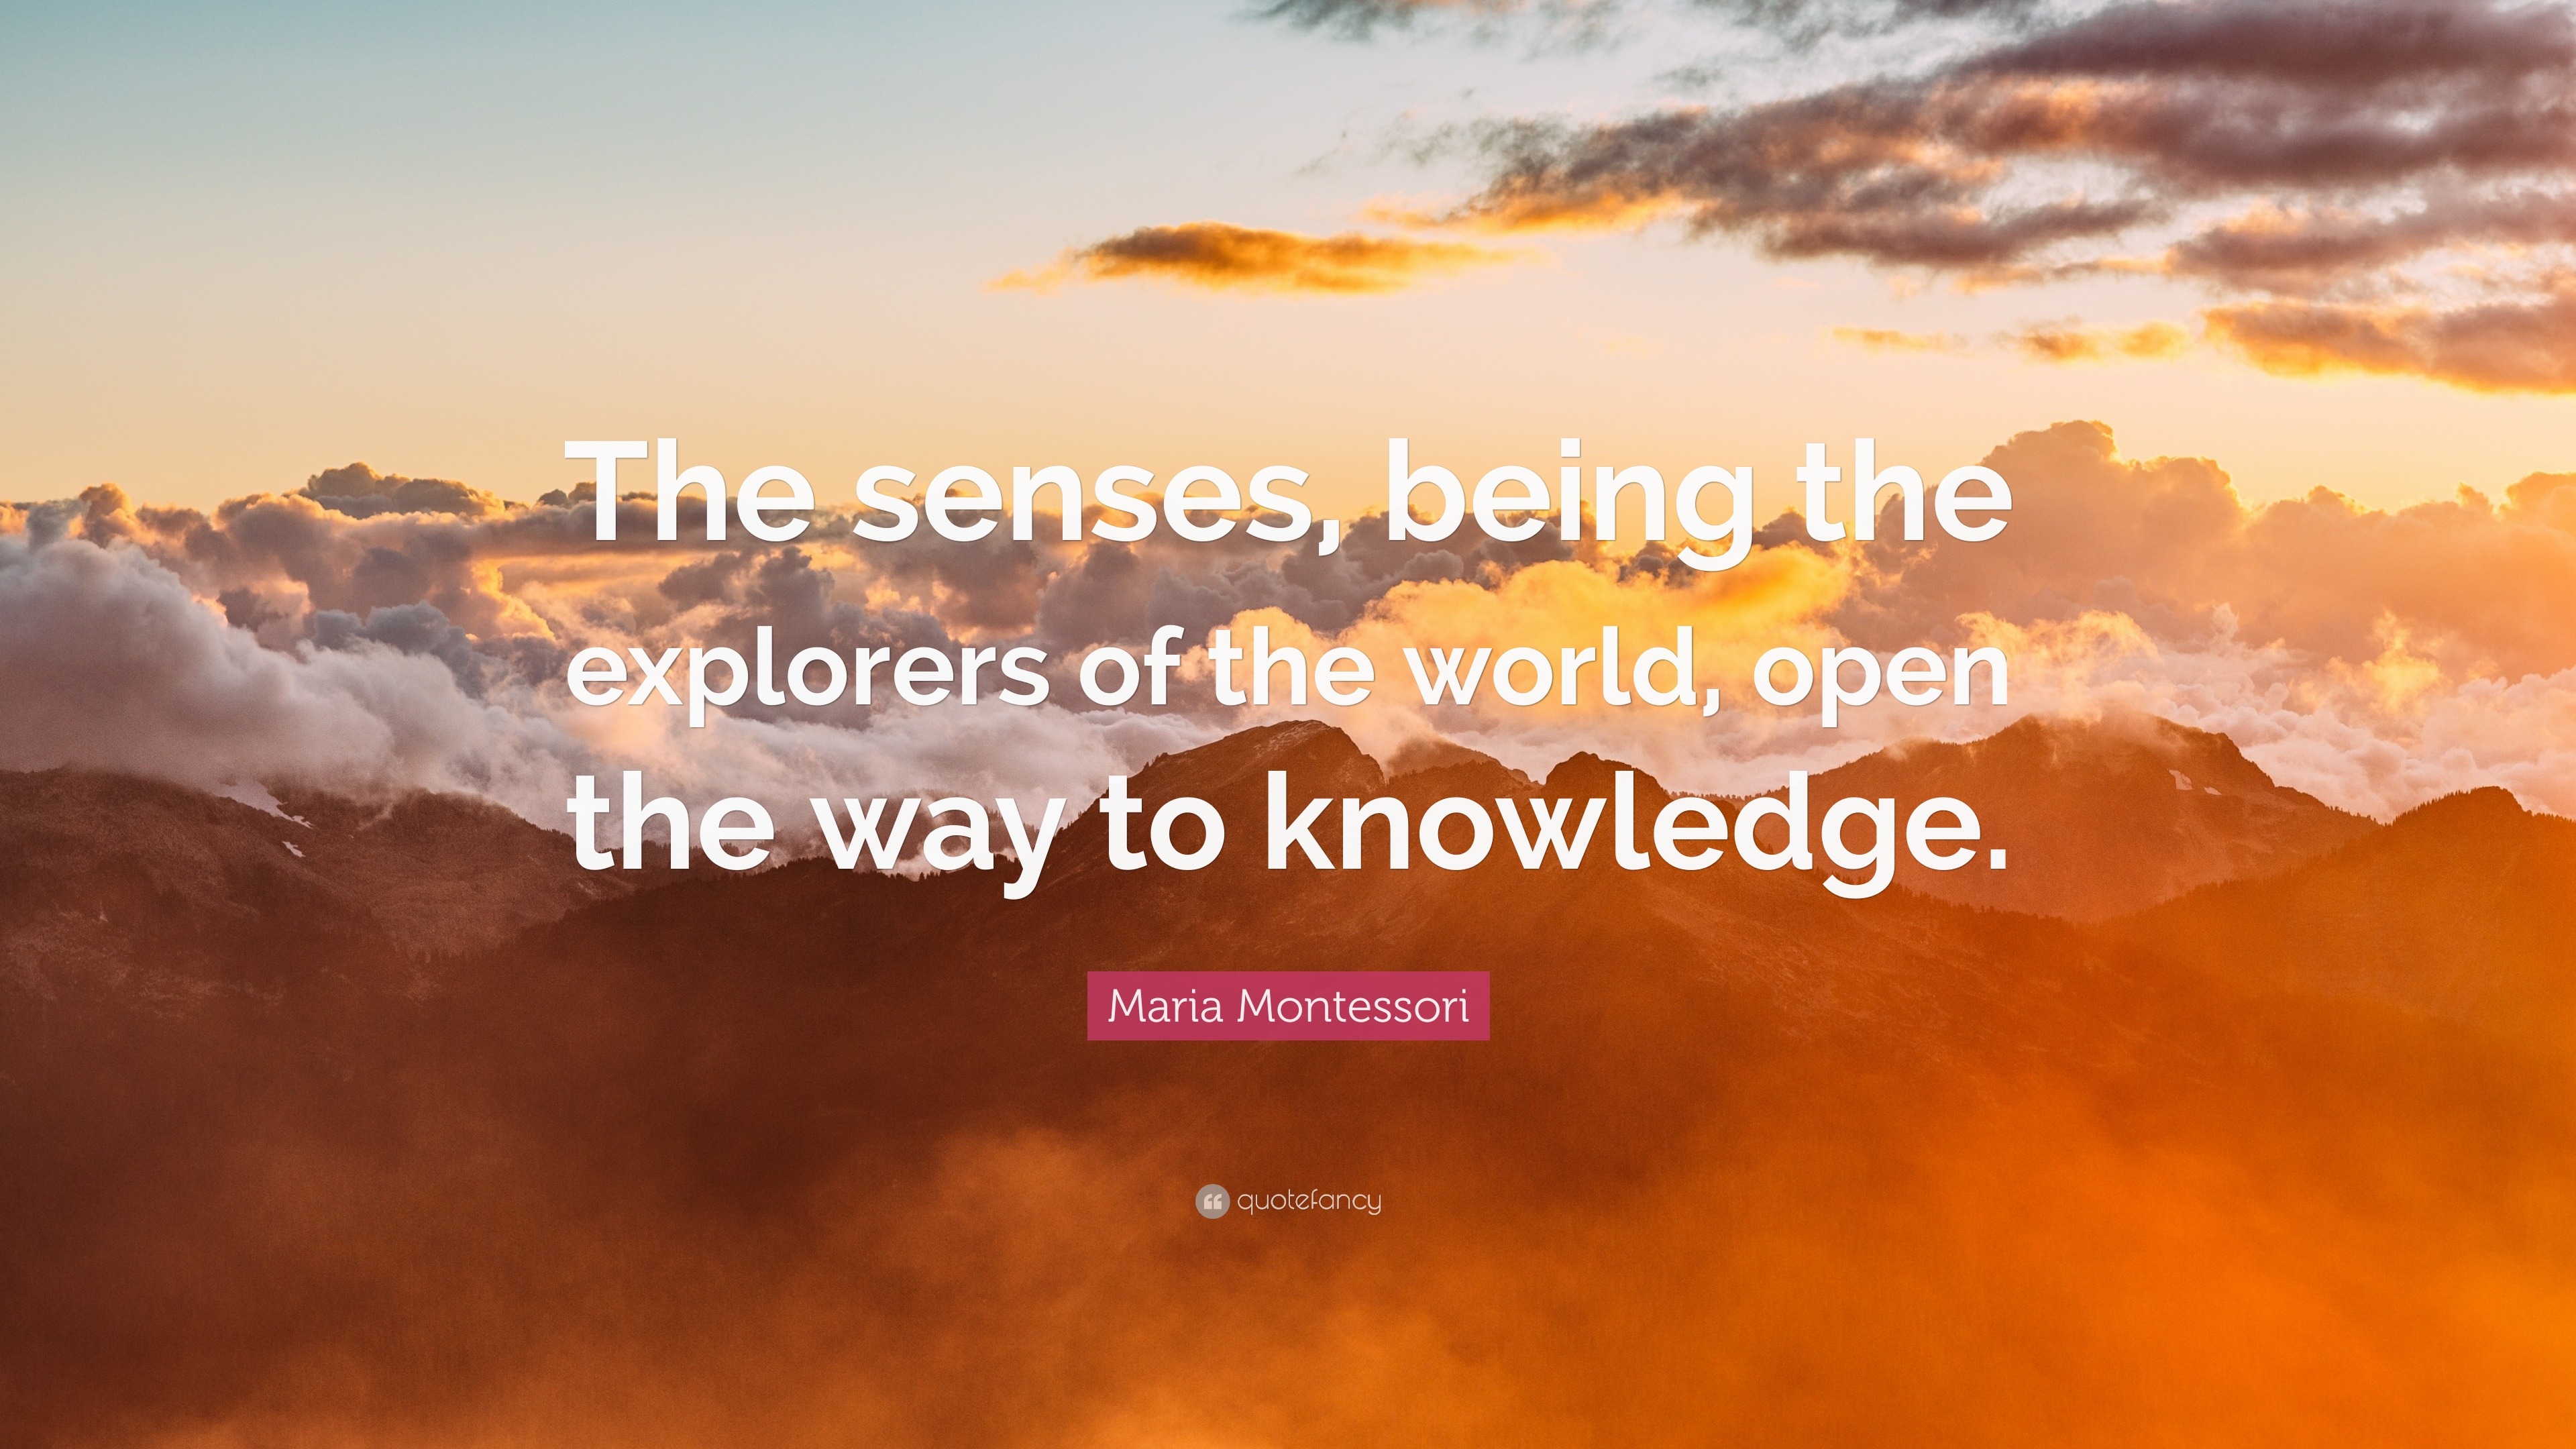 Maria Montessori Quote: “The senses, being the explorers of the world